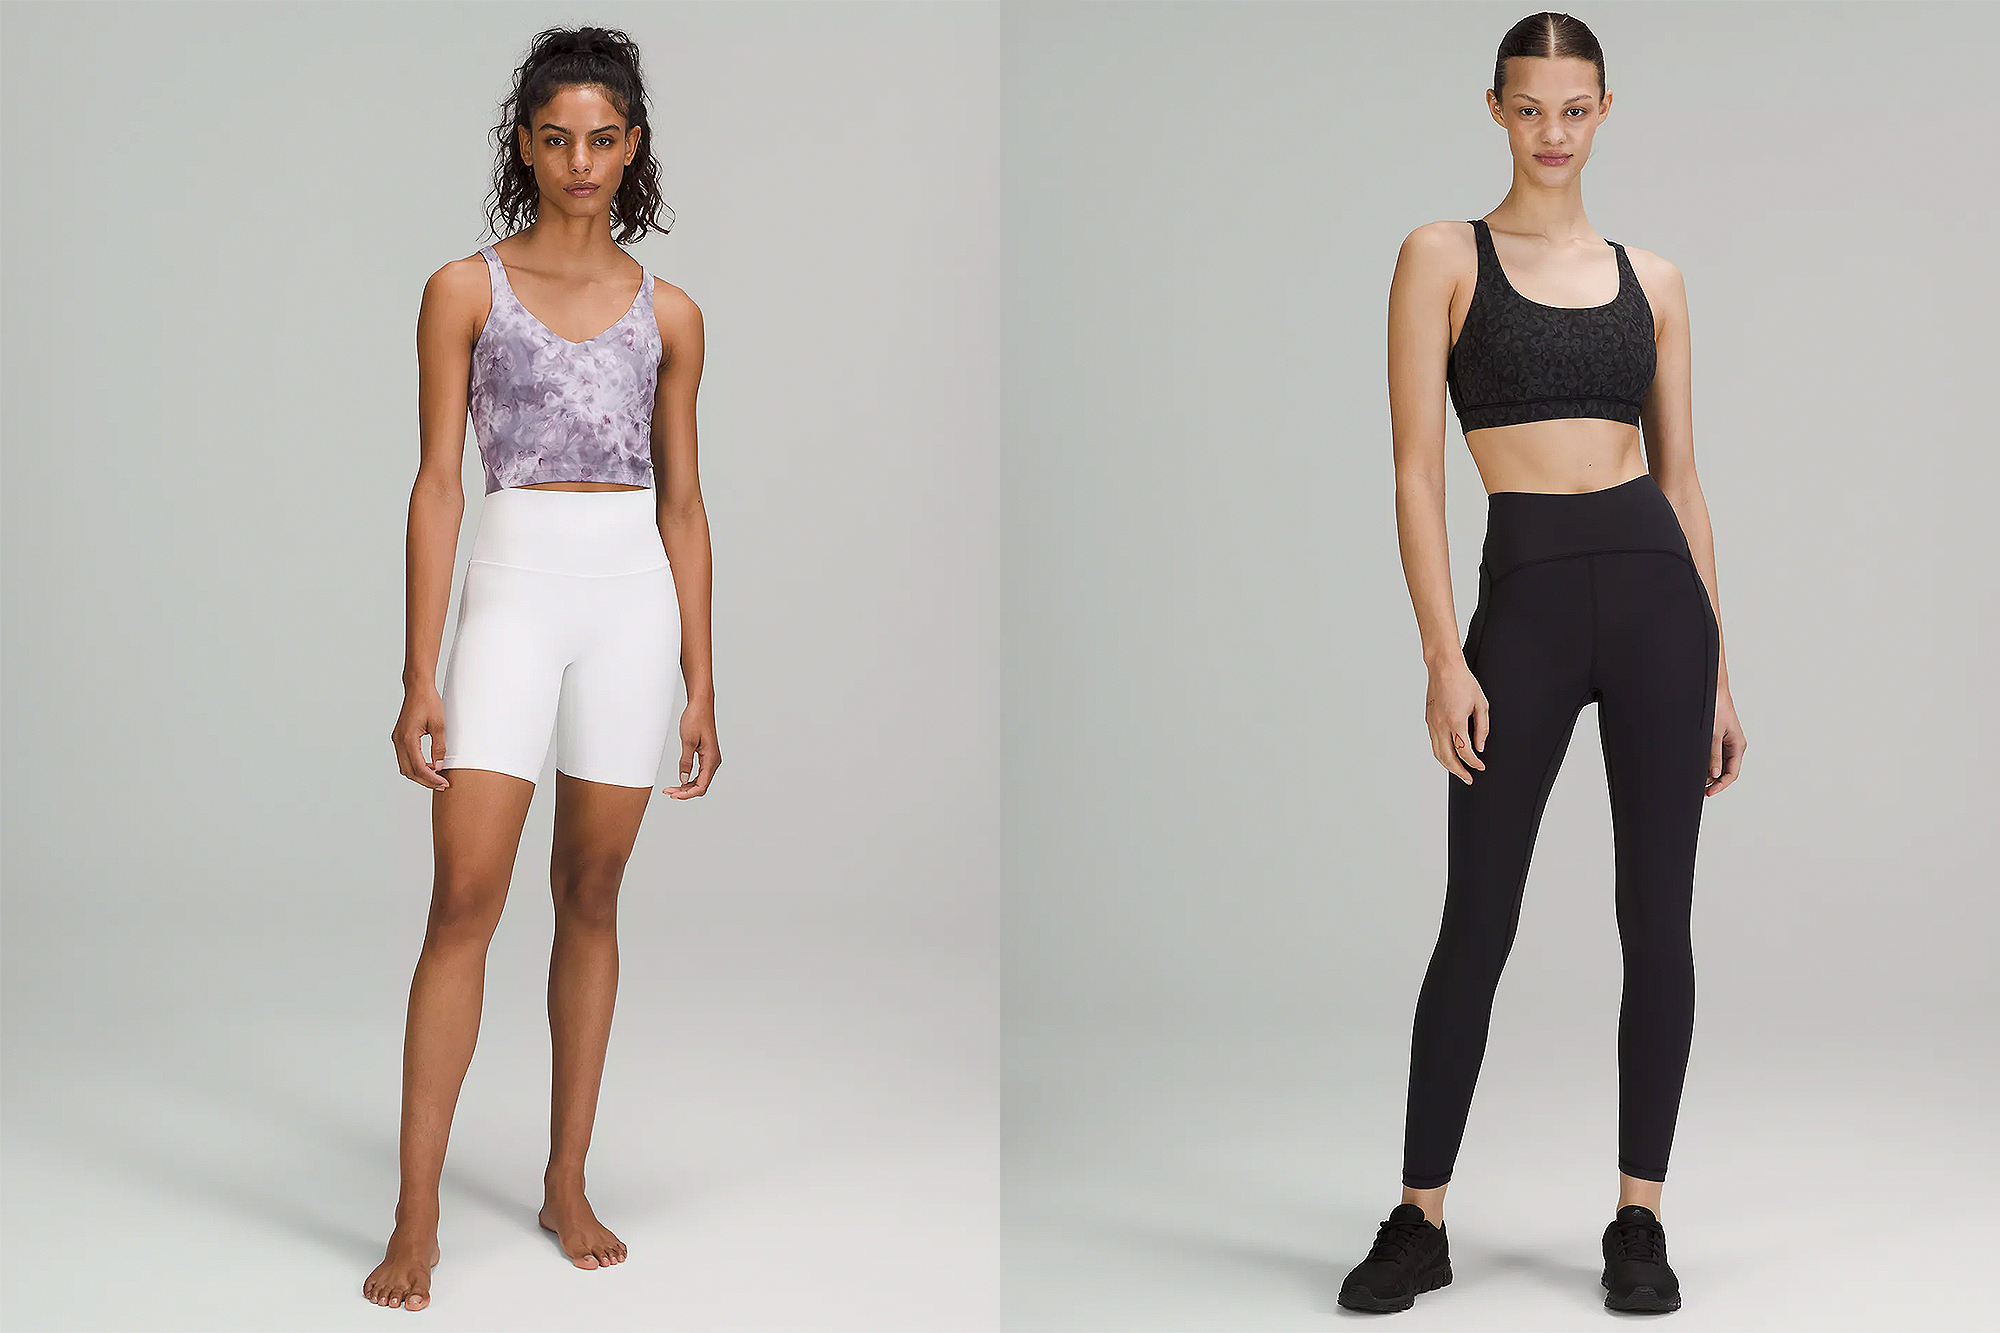 lululemon Has the Best Comfy Pieces That Give You Confidence